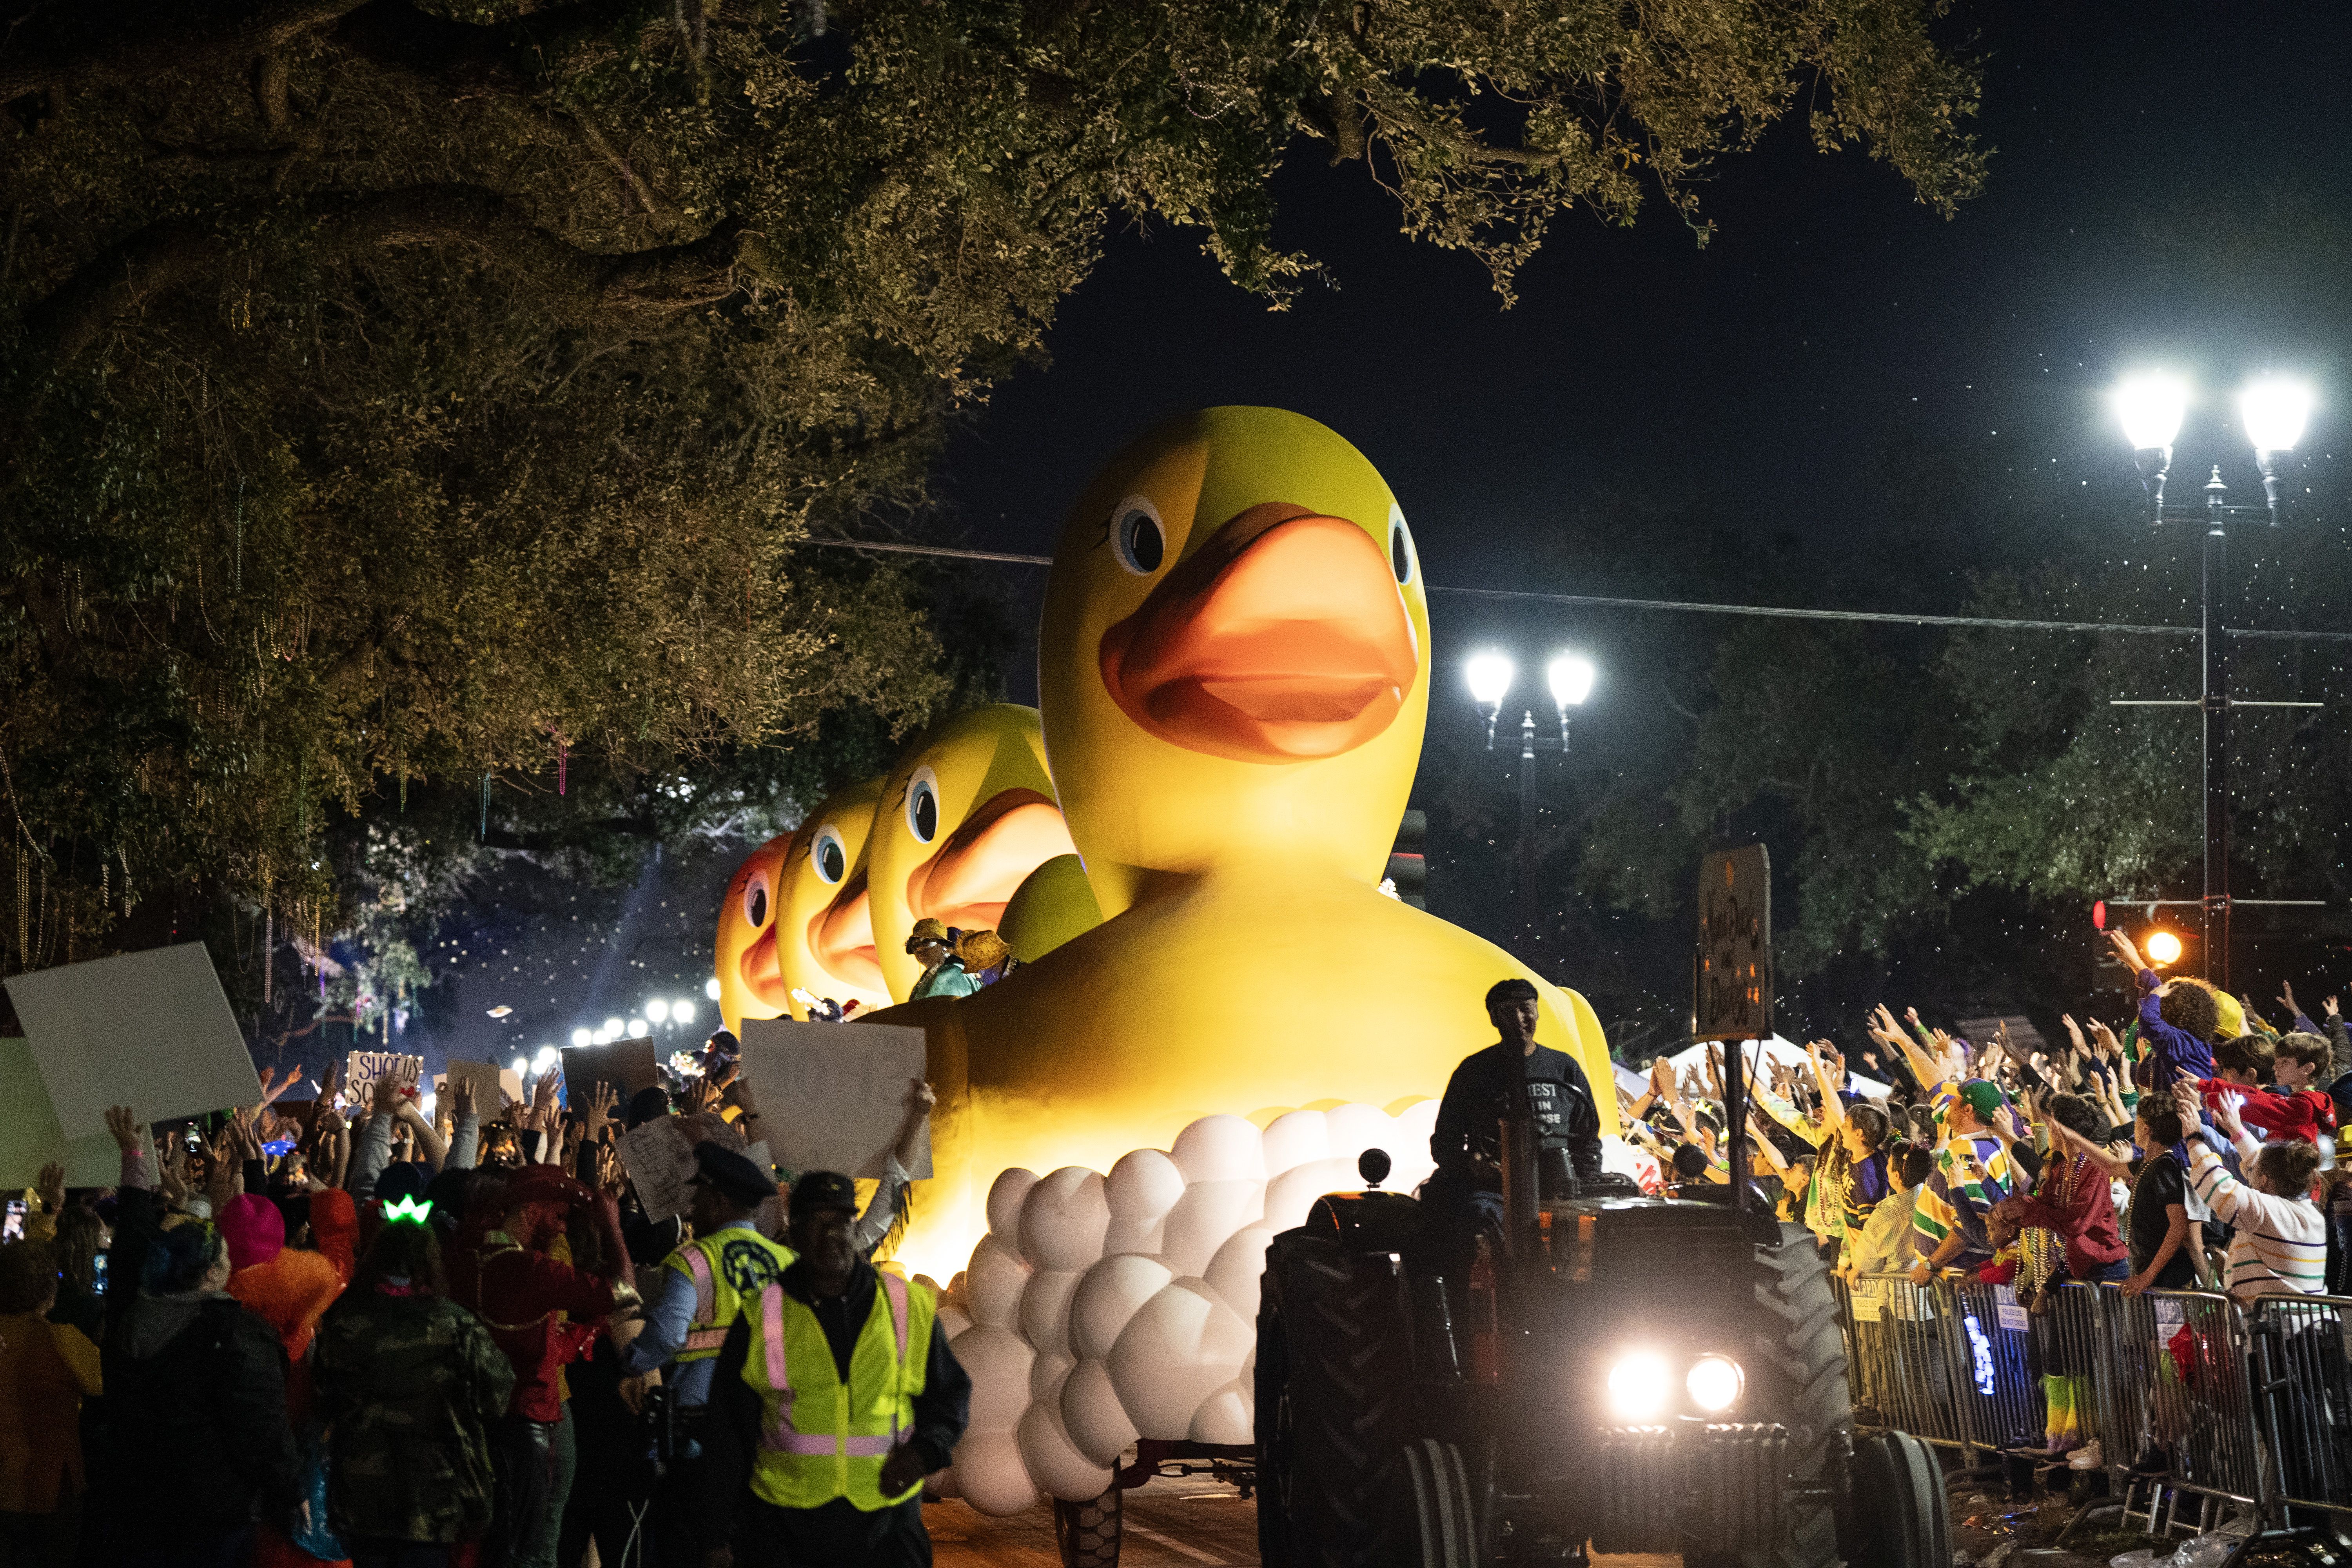 Photo shows the rubber duck floats in the Krewe of Muses parade